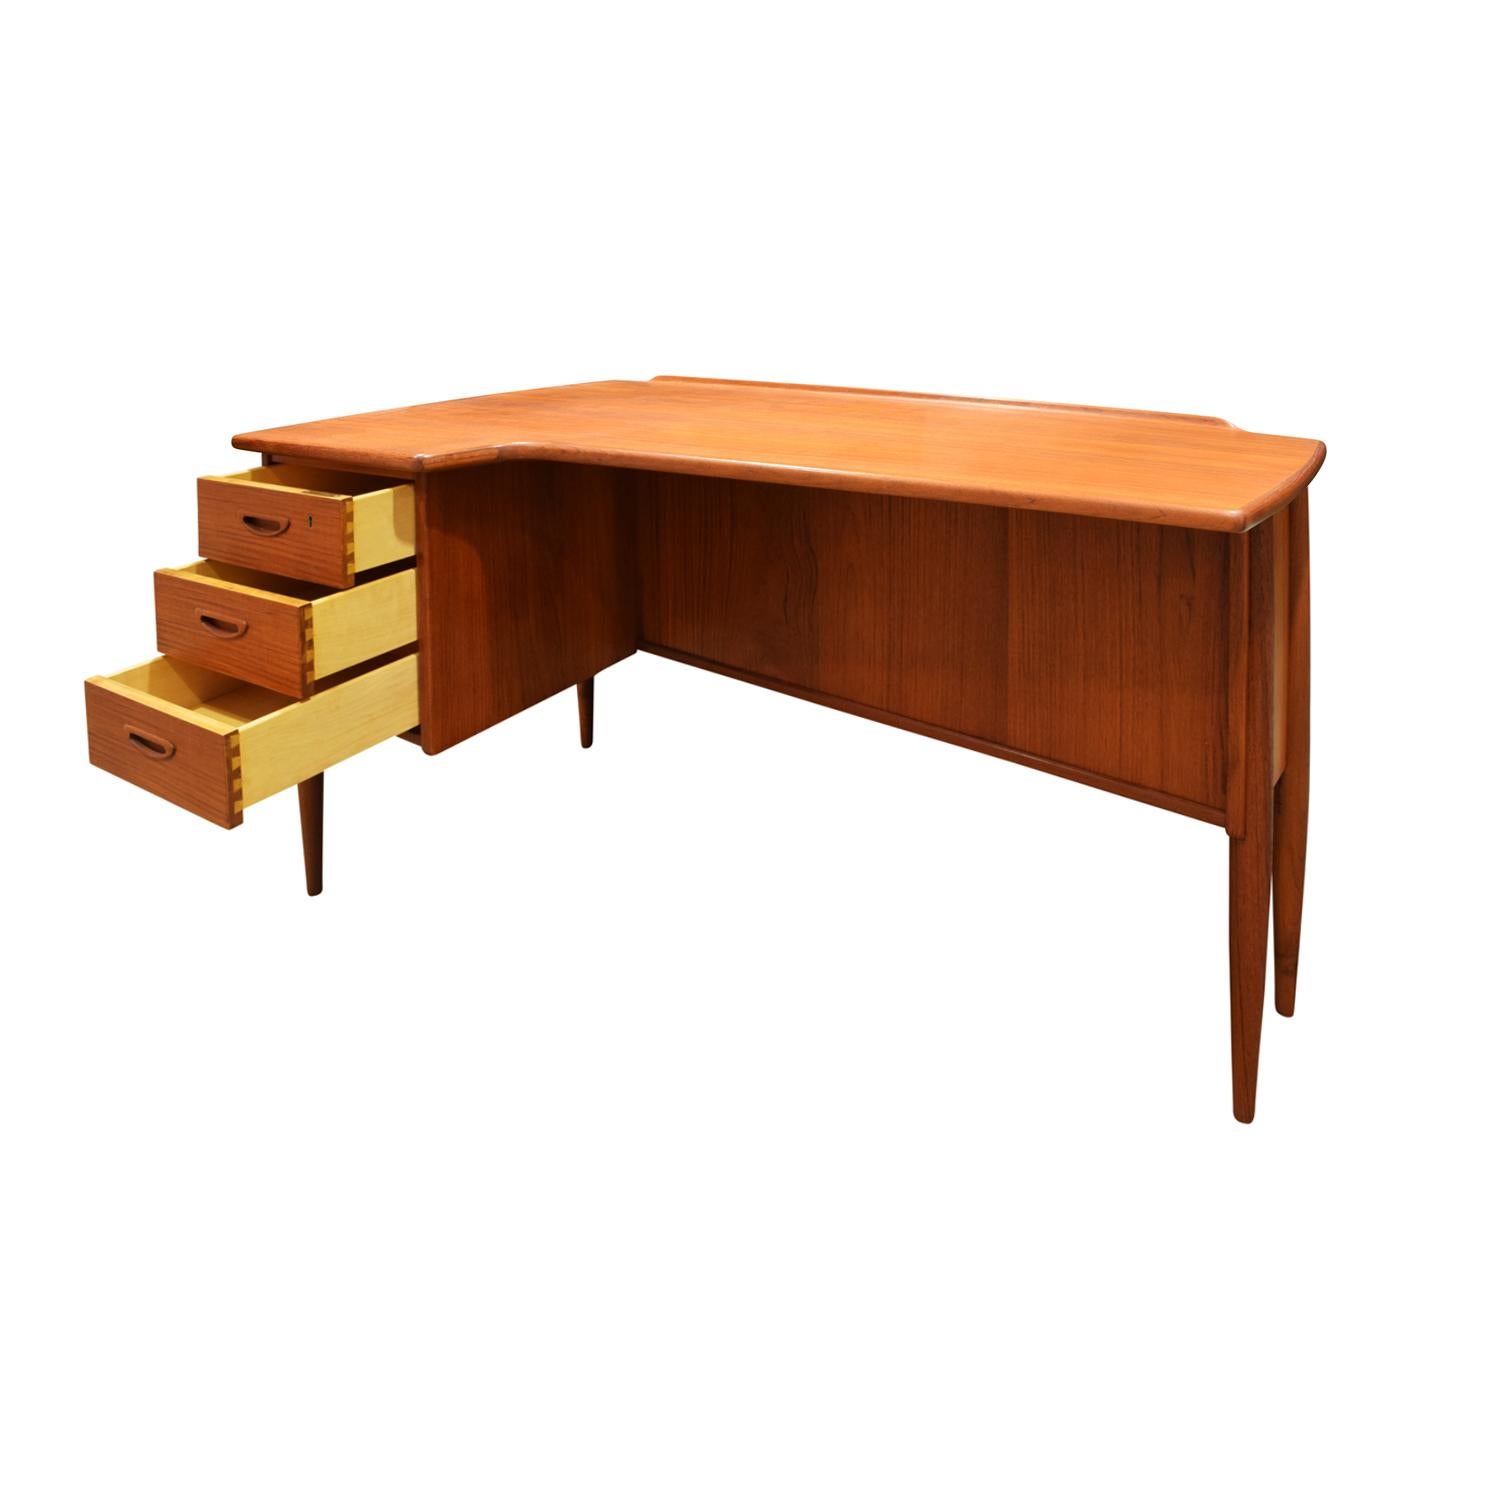 Hand-Crafted Beautifully Crafted Swedish Desk In Teak 1960s